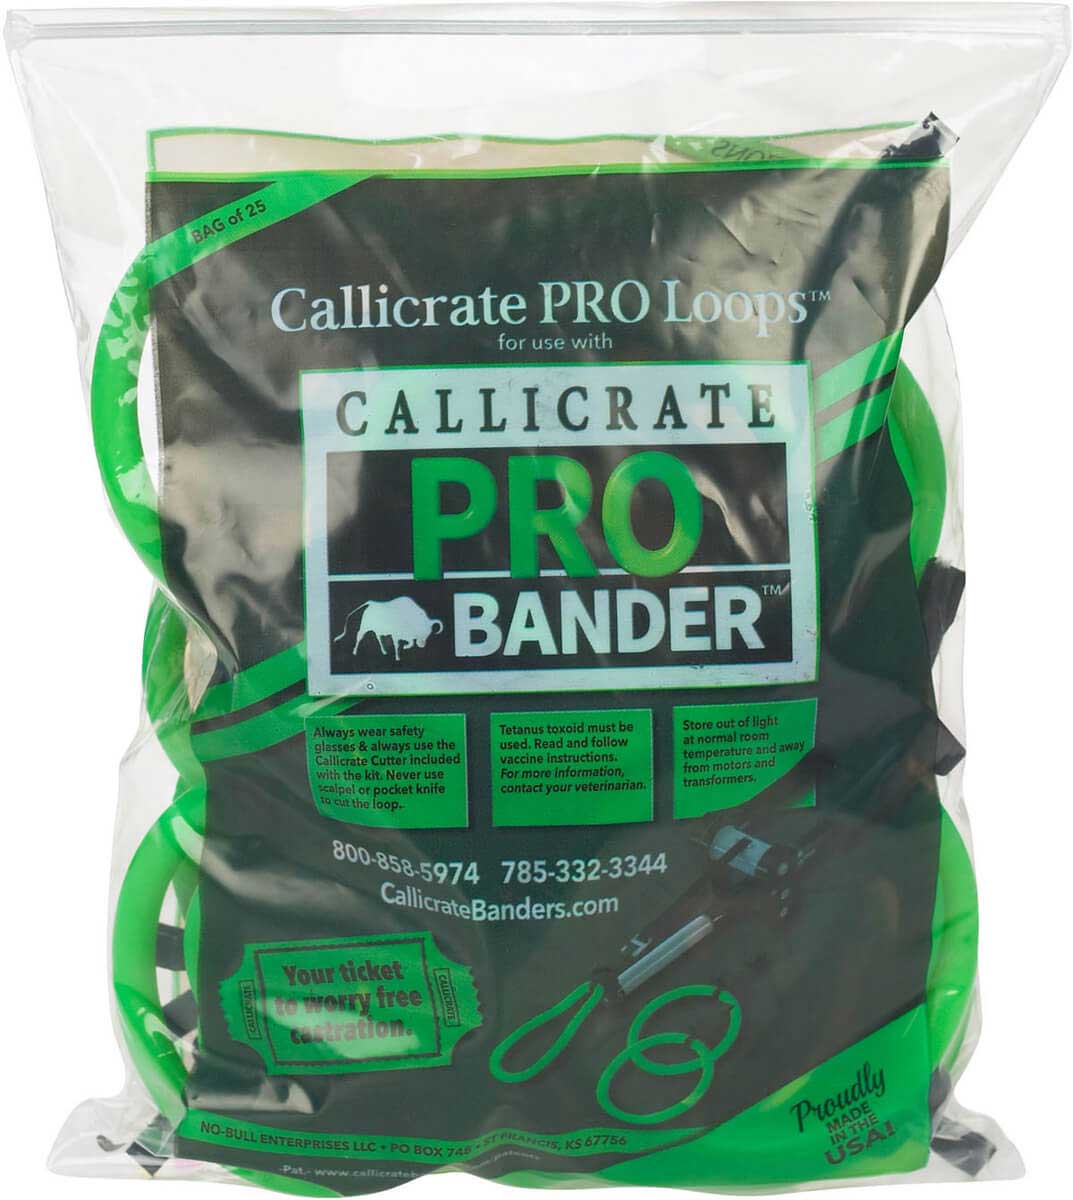 Callicrate Bander No Bull Castrating Bands 25 Count Cattle Banding Loops NEW 